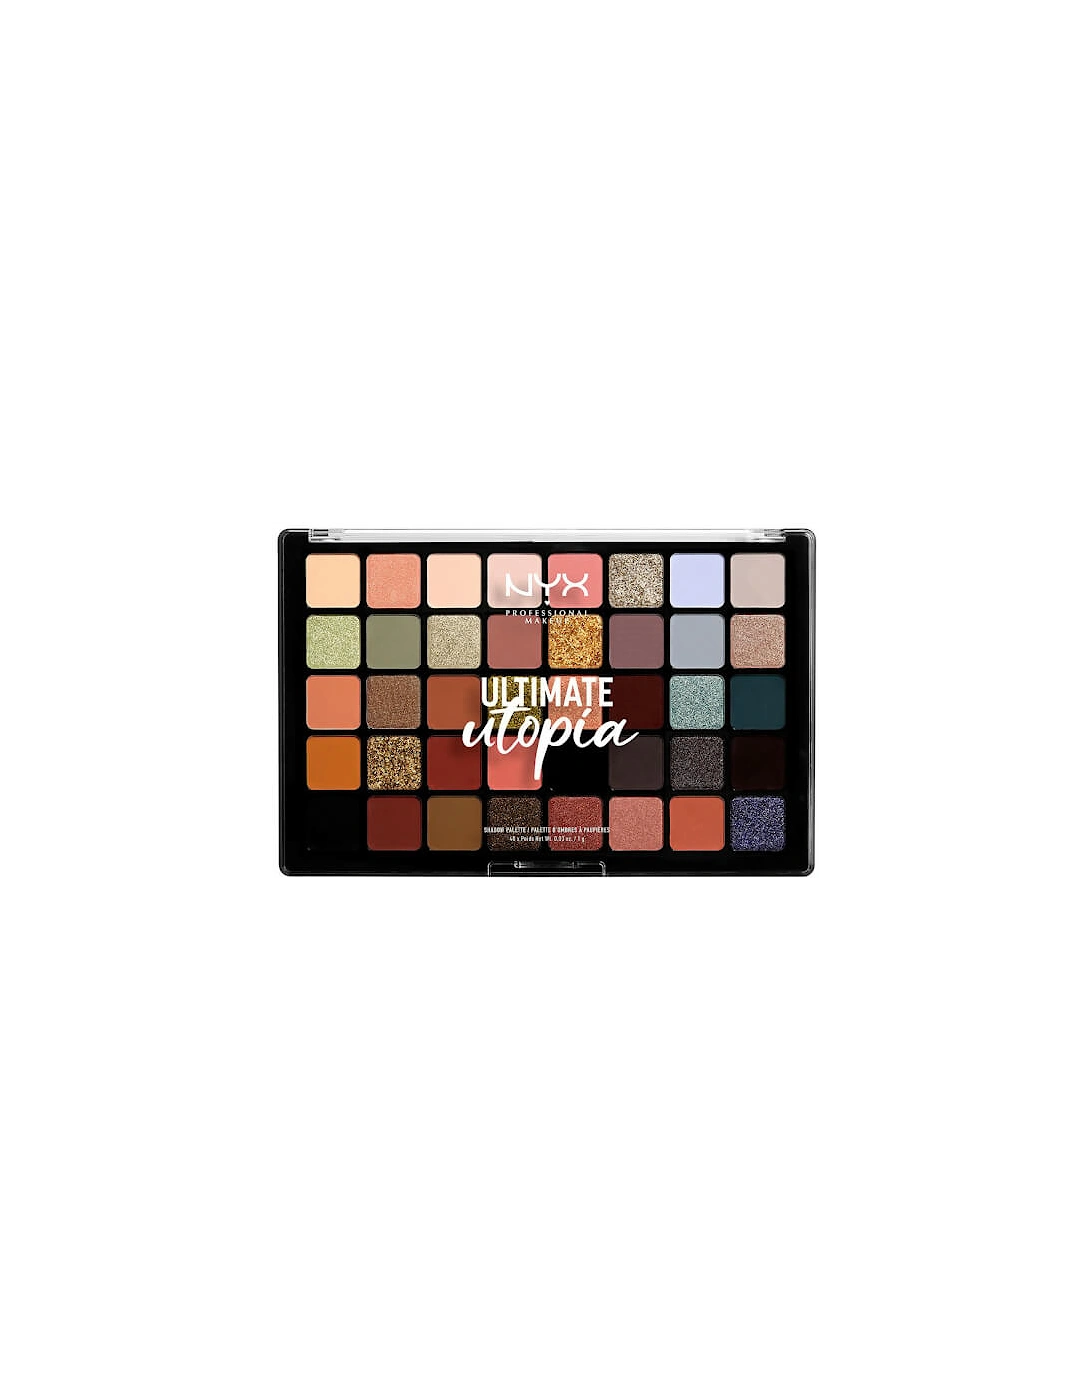 Ultimate Shadow Utopia Palette - 40 Shades 10g - NYX Professional Makeup, 2 of 1